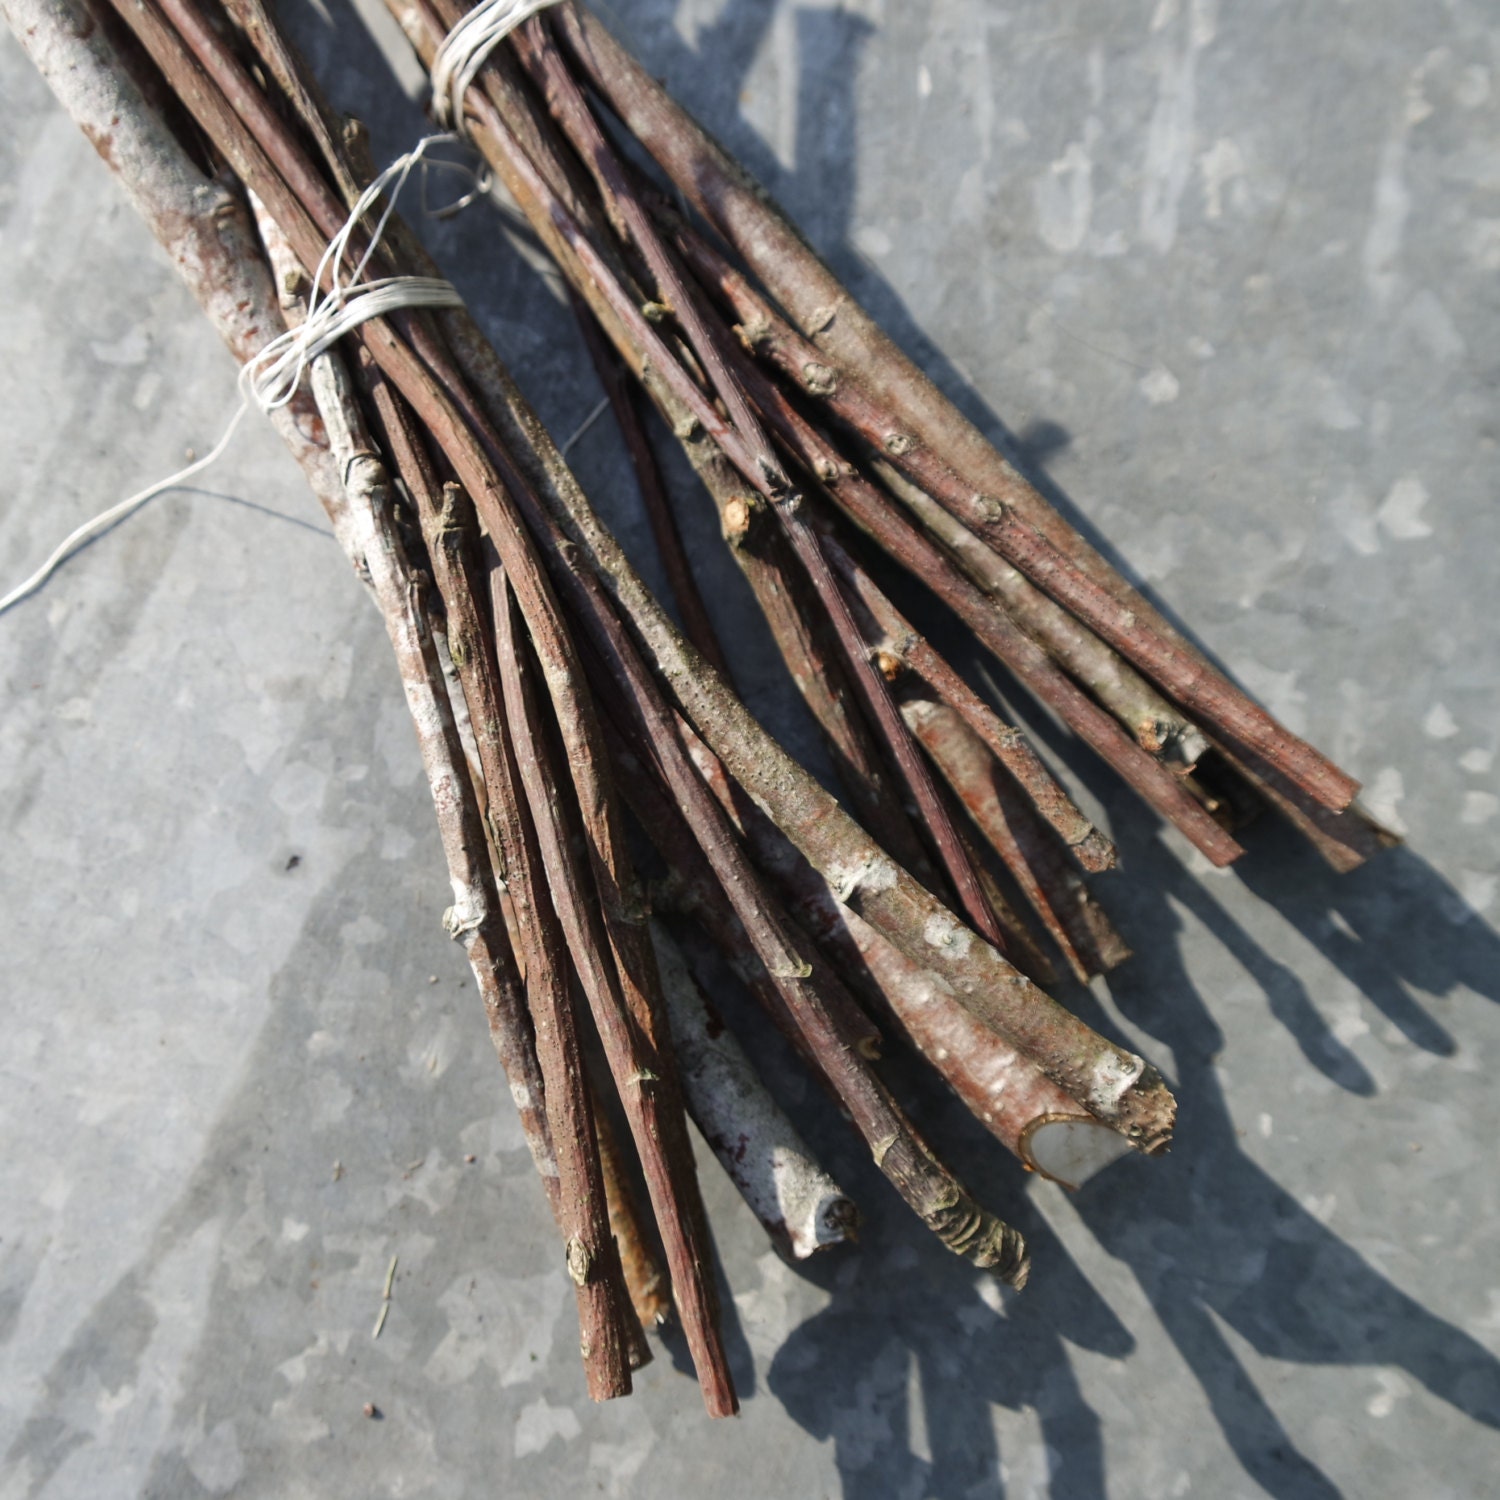 Wood Branch, Maple Stick, Dried for 2 Years, Large Wood Stick